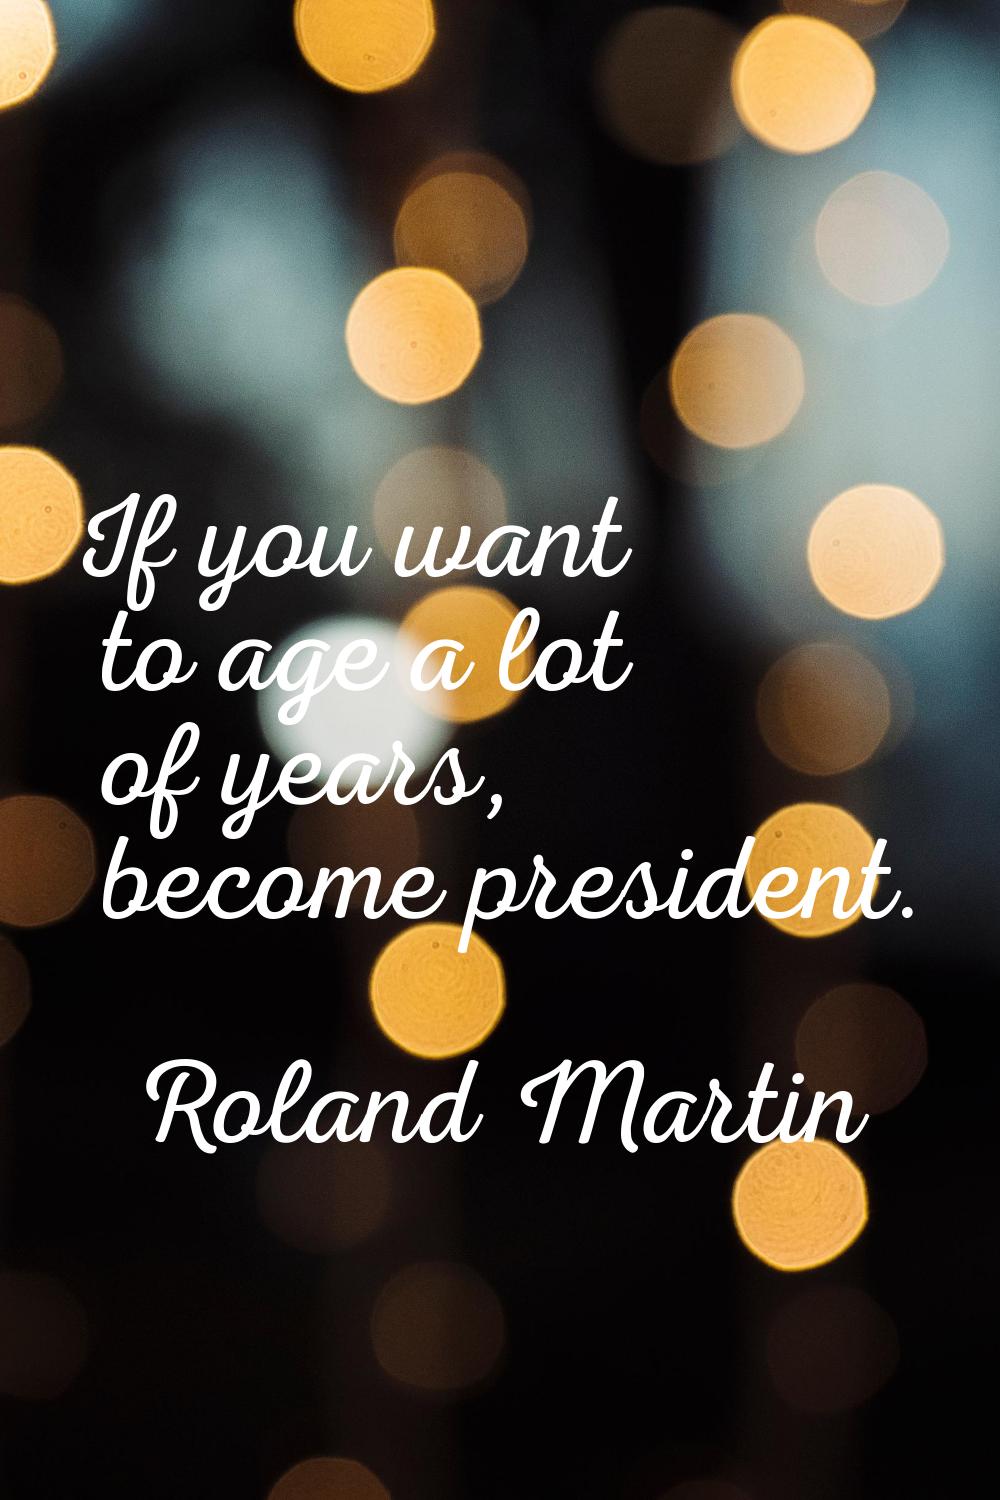 If you want to age a lot of years, become president.